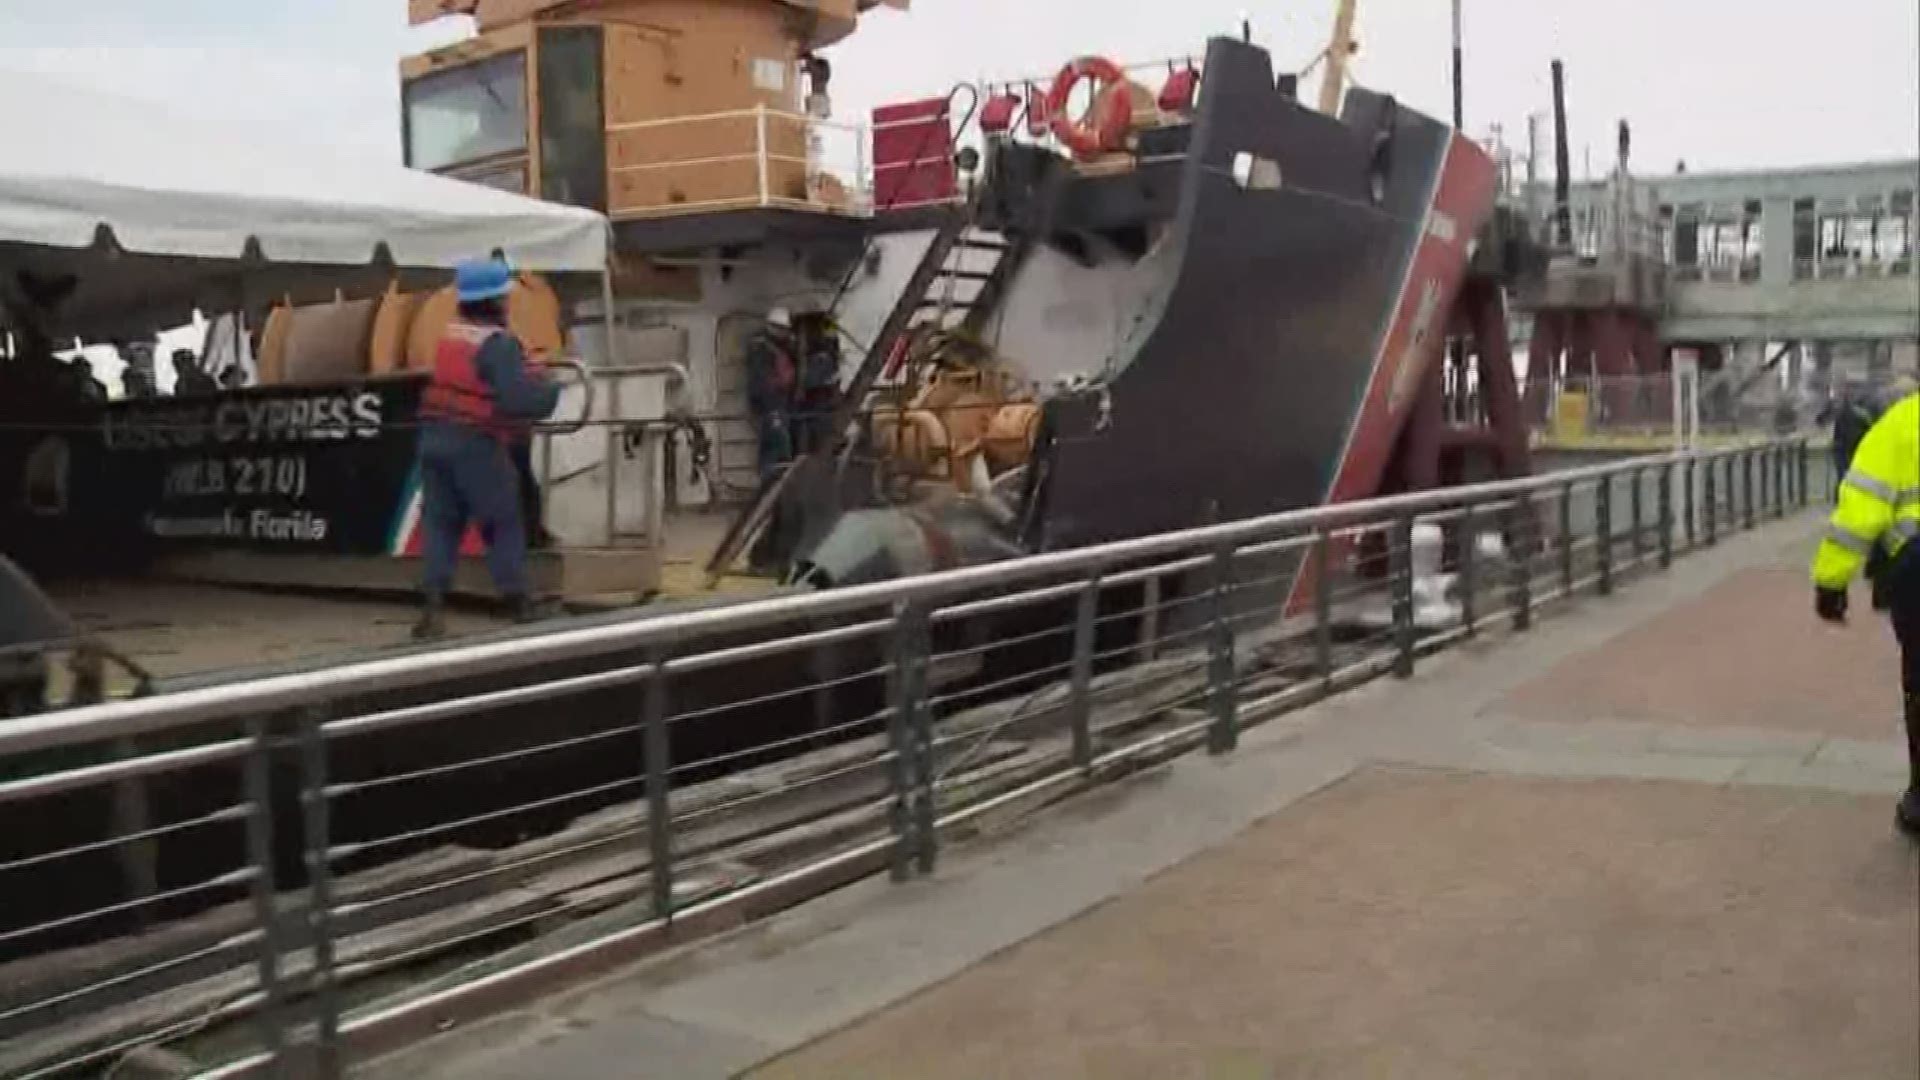 Breaking news from the Riverfront in New Orleans, where a Coast Guard ship has collided with a dock.